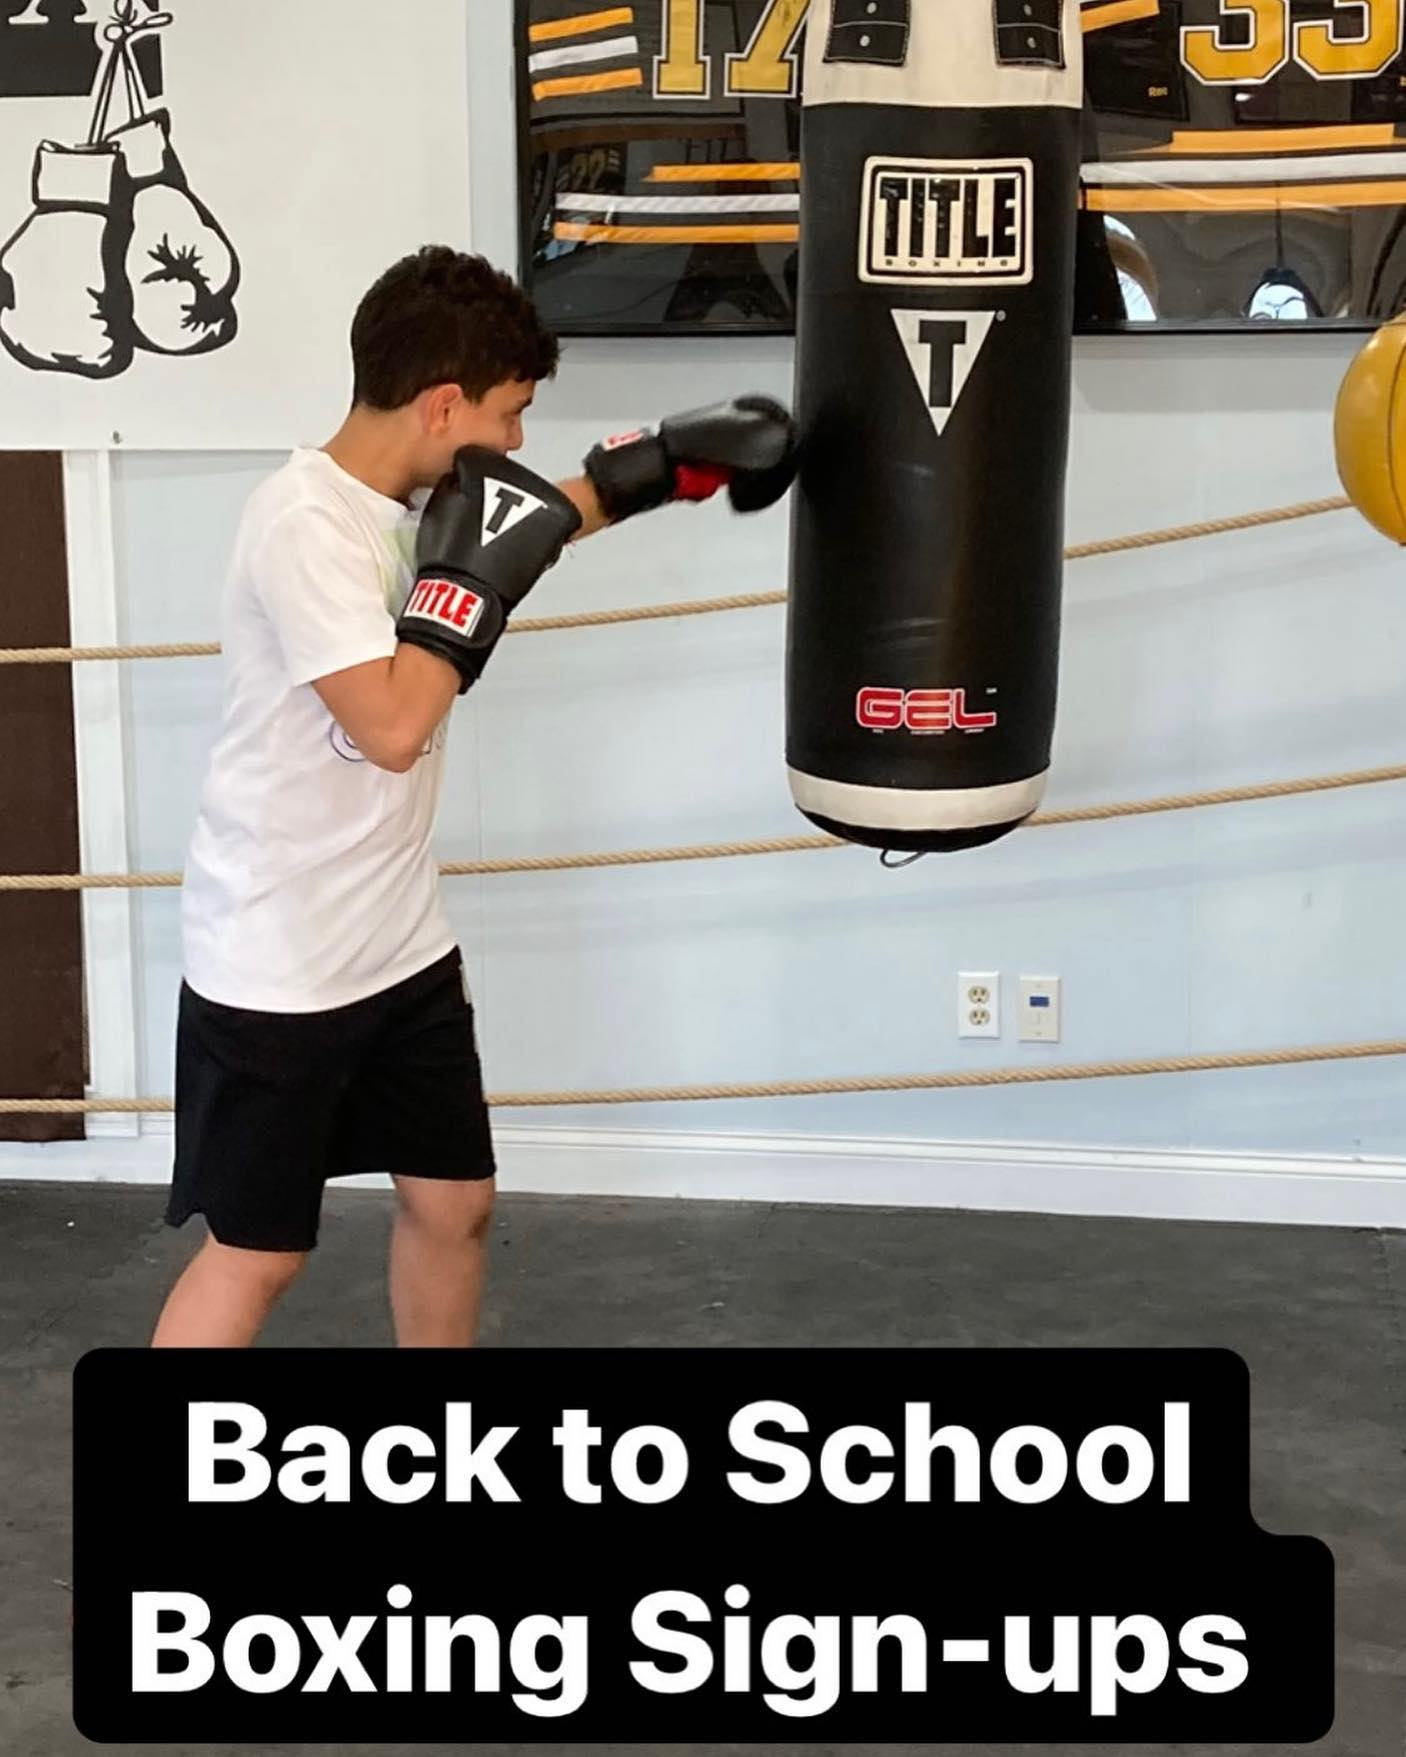 Summer is over and School is back, Contact us Today to learn more about available times we have for after-school Boxing training . Phone/text (781)727-9503 or email fitbox@outlook.com @tommymcinerney